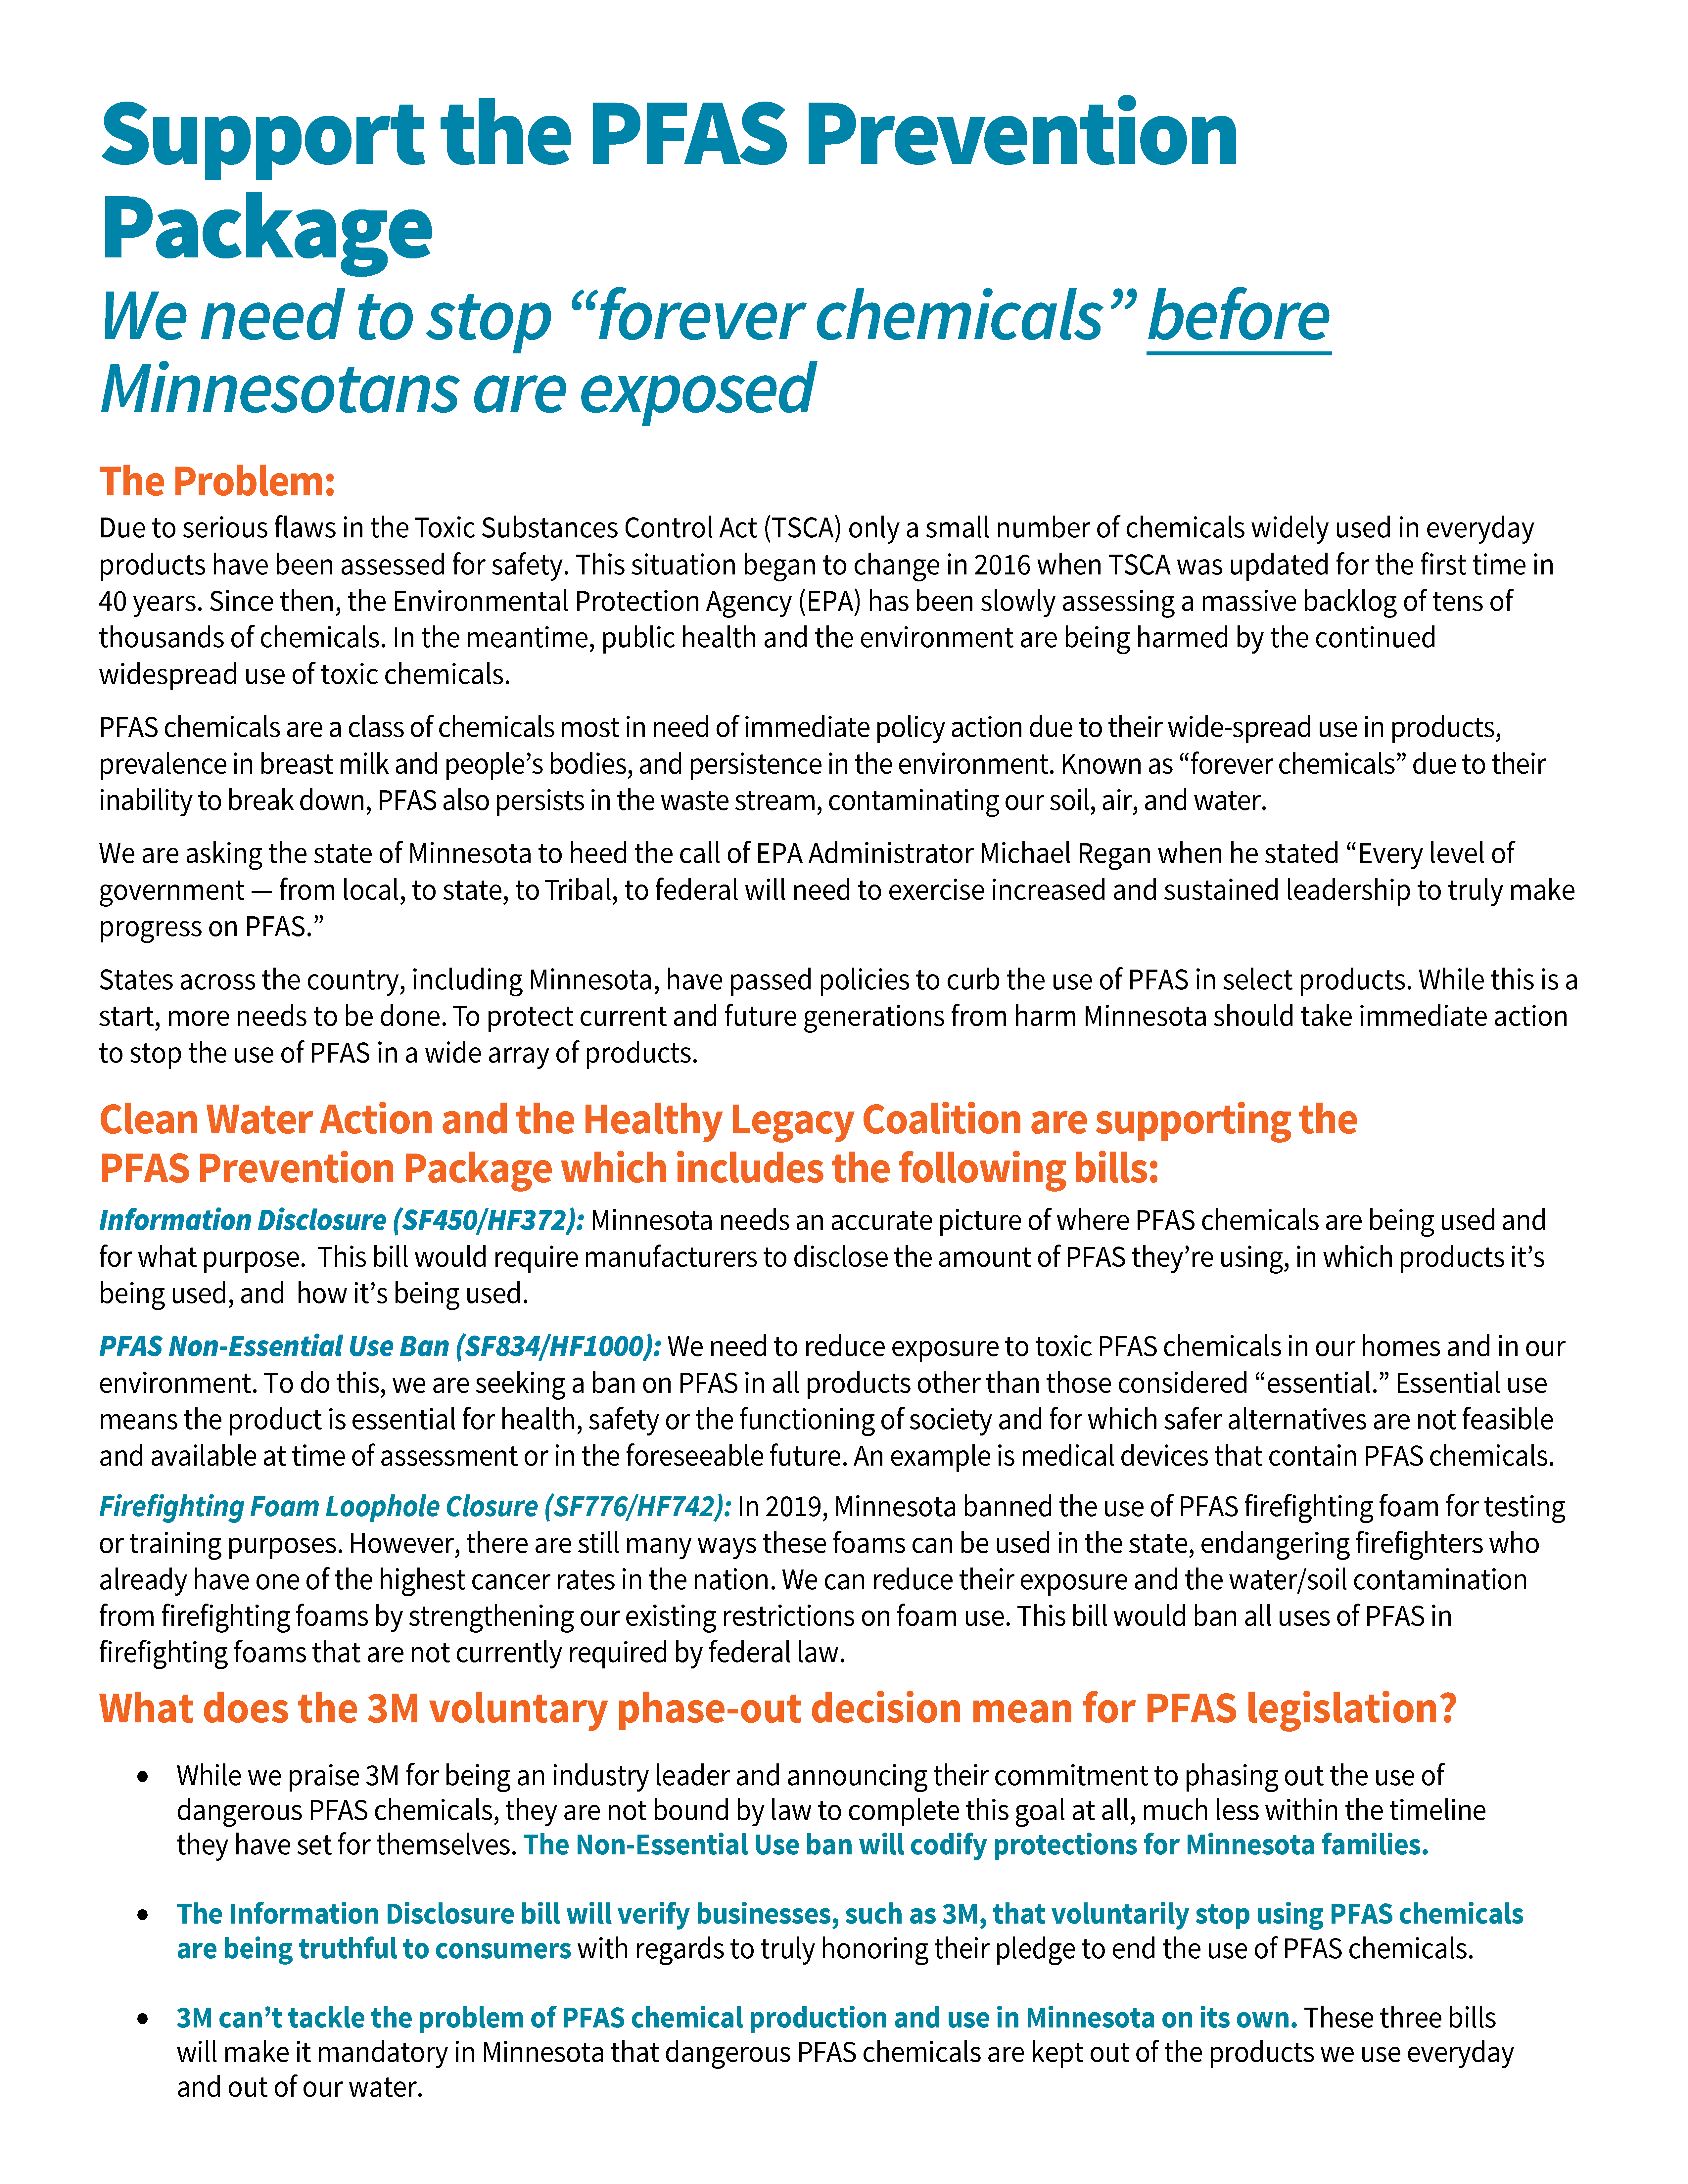 Support the PFAS Prevention PackageWe need to stop “forever chemicals” before Minnesotans are exposed | Page 1